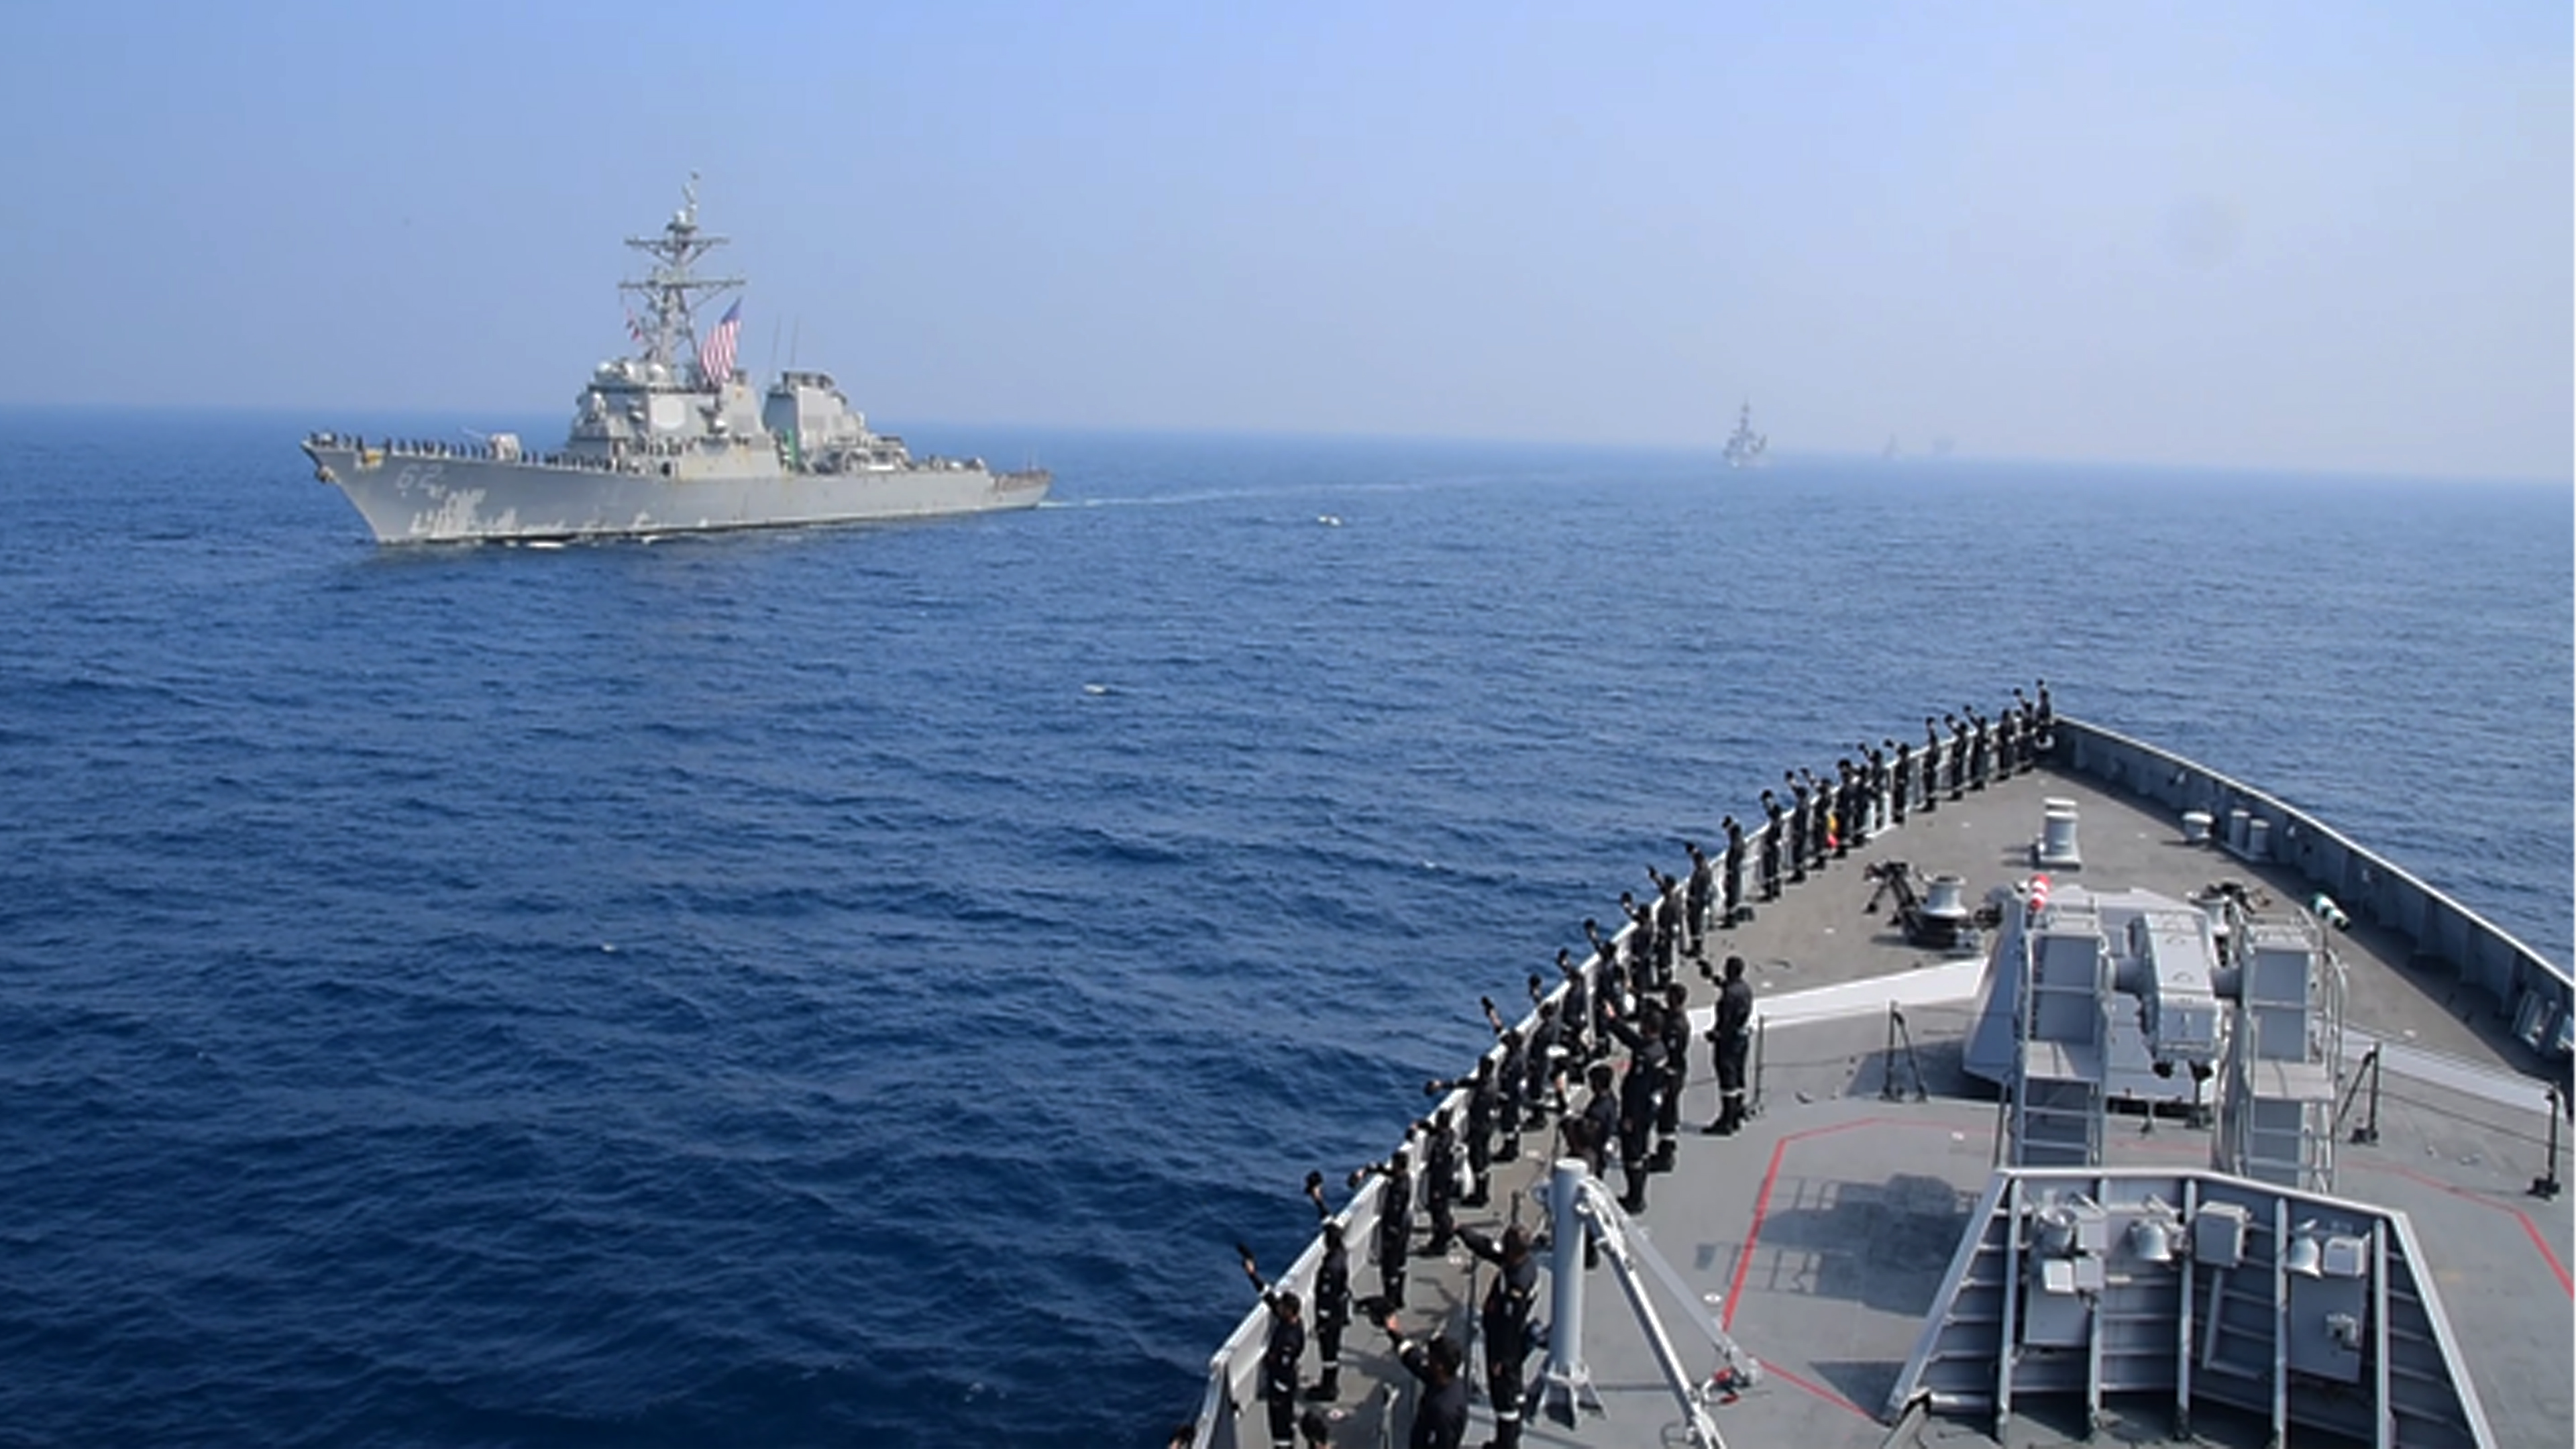 https://static.pib.gov.in/WriteReadData/userfiles/image/Indian_Navy_ships_crew_bidding_adieu_to_personnel_of_foreign_ships_post_completion_of_sea_phase_of_e_308679679NR.jpg